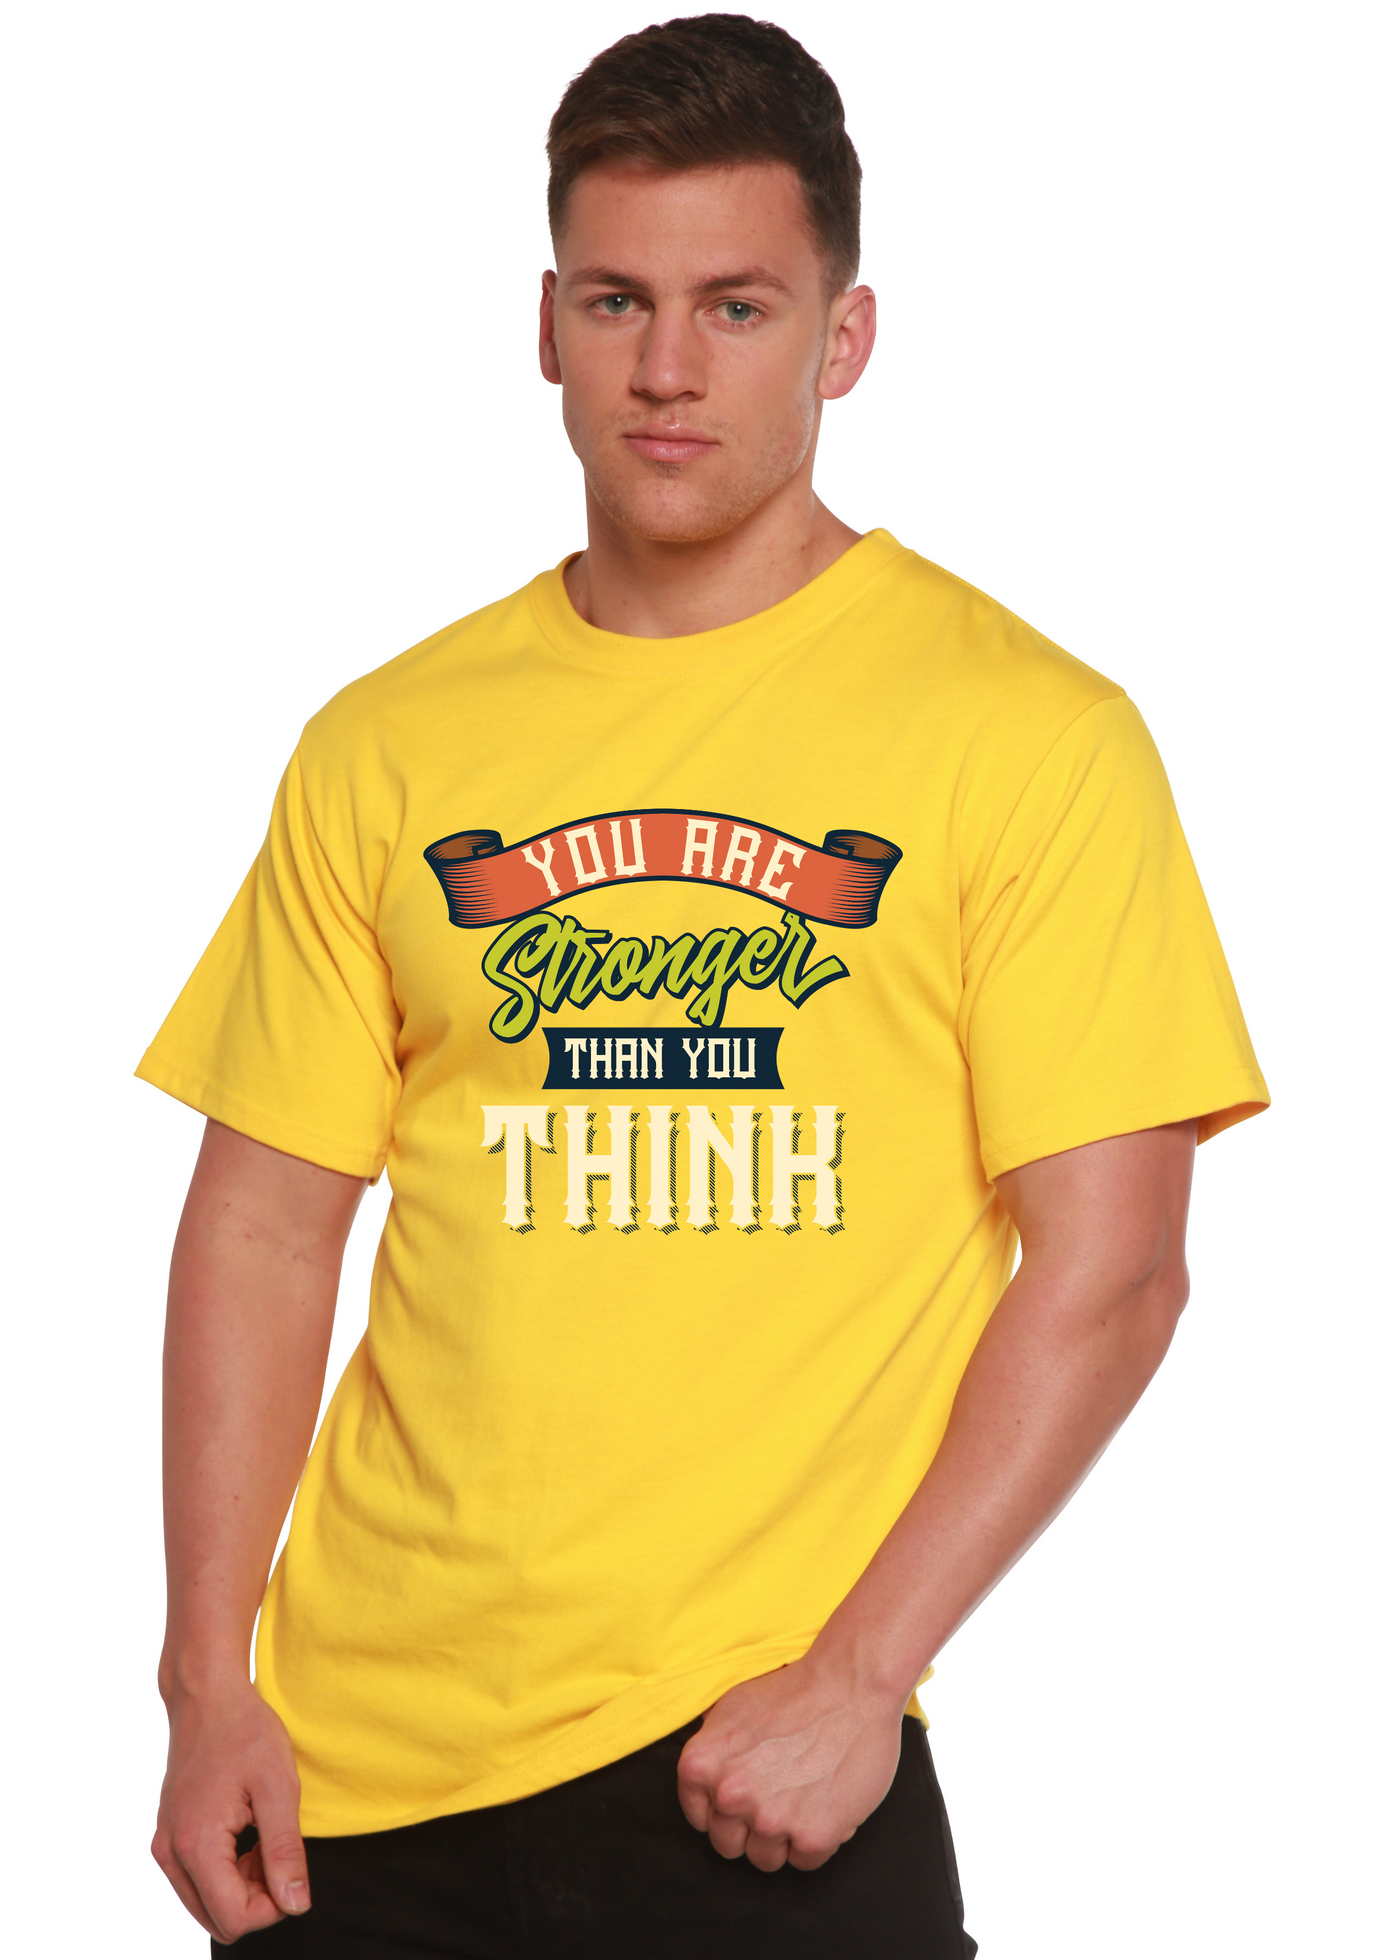 You Are Stronger Than You Think men's bamboo tshirt lemon chrome